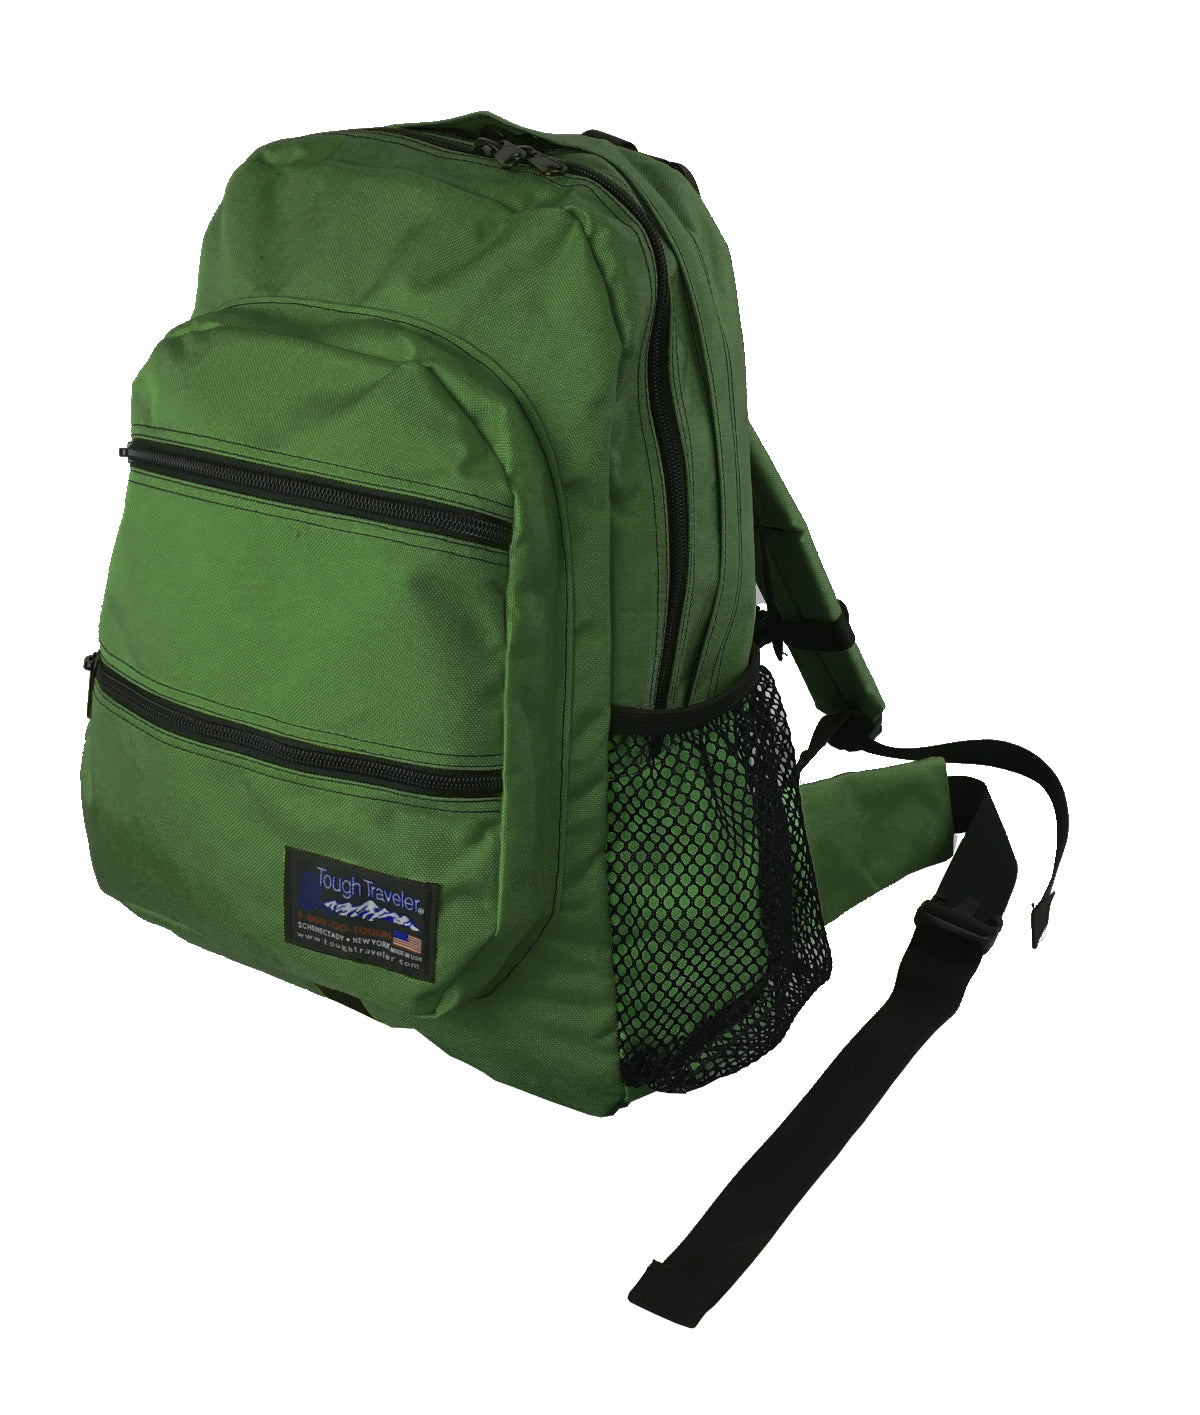 Explore 24-Inch Explorer Giant Tactical Backpack, Green